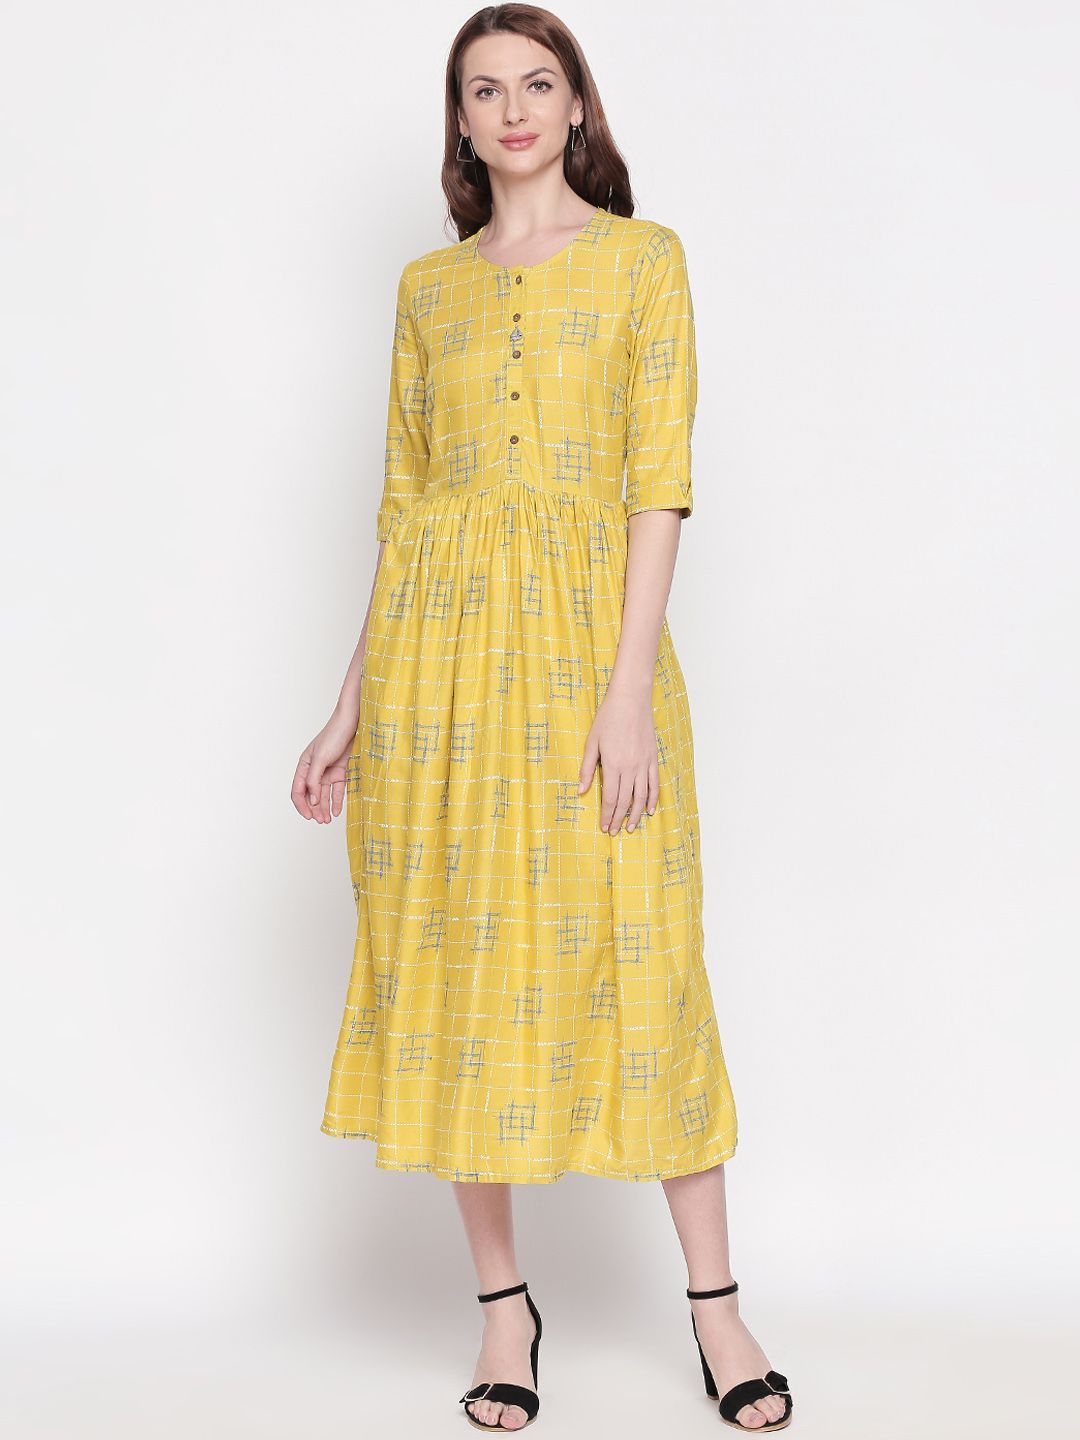 AKKRITI BY PANTALOONS Women Yellow Checked Fit and Flare Dress Price in India